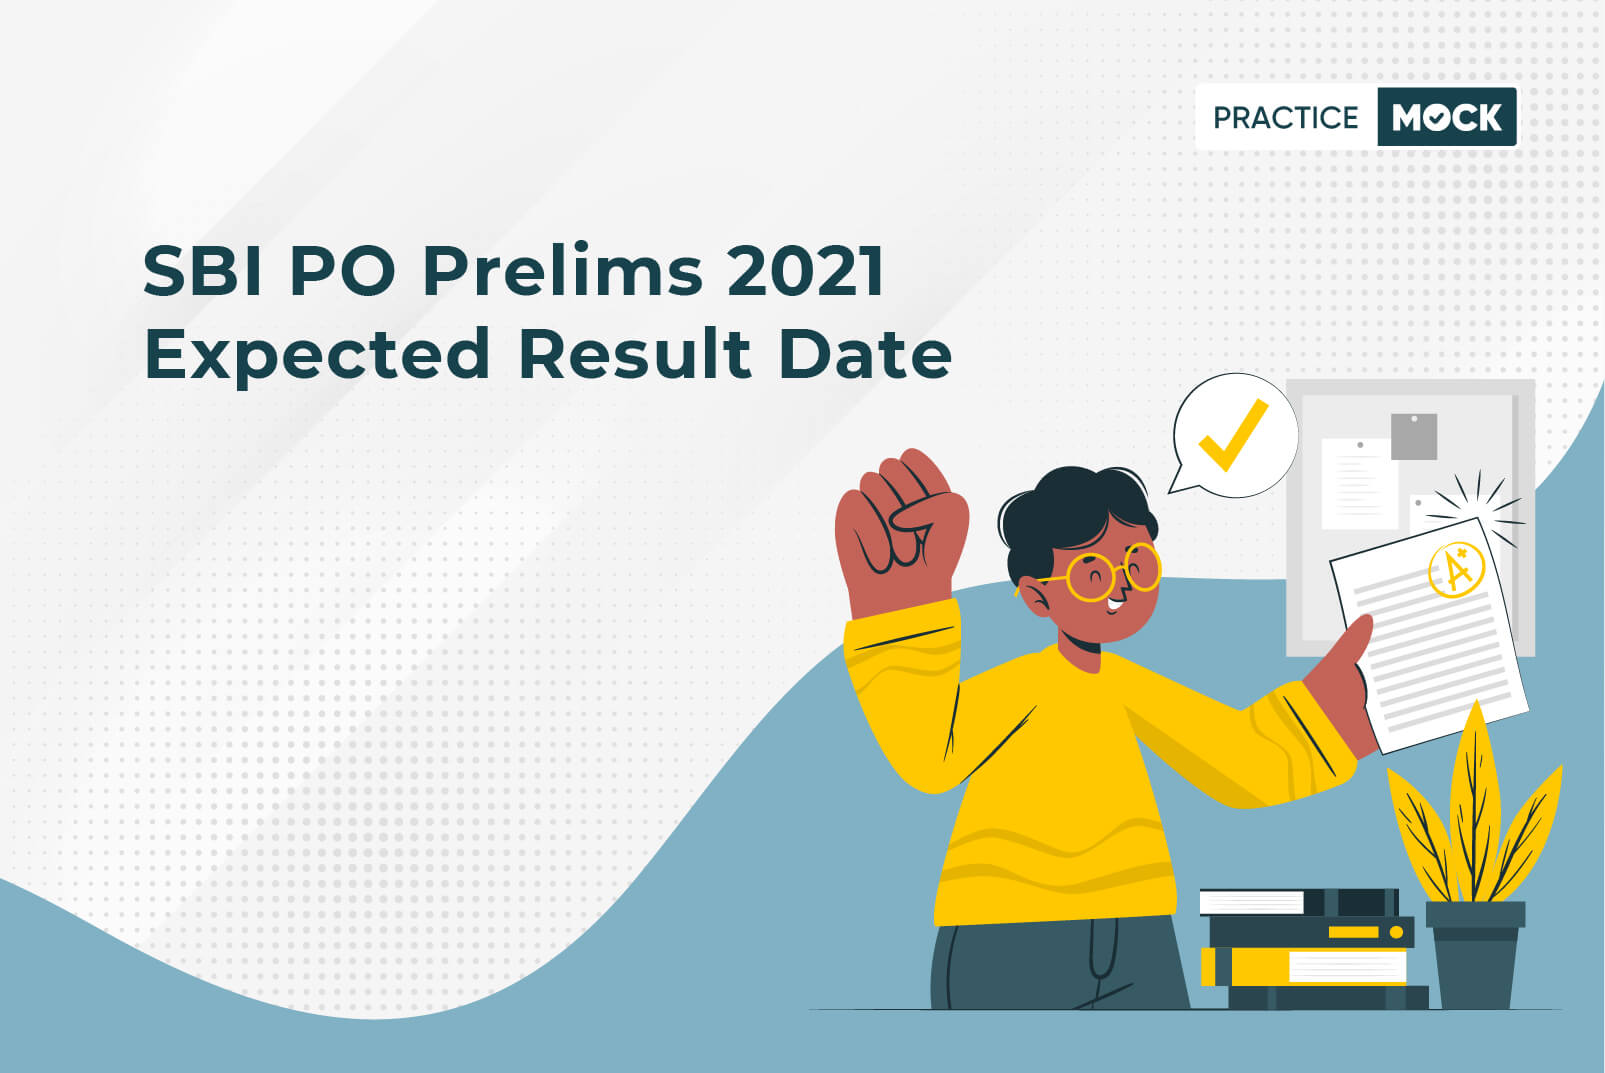 SBI PO Prelims 2021 Expected Result Date